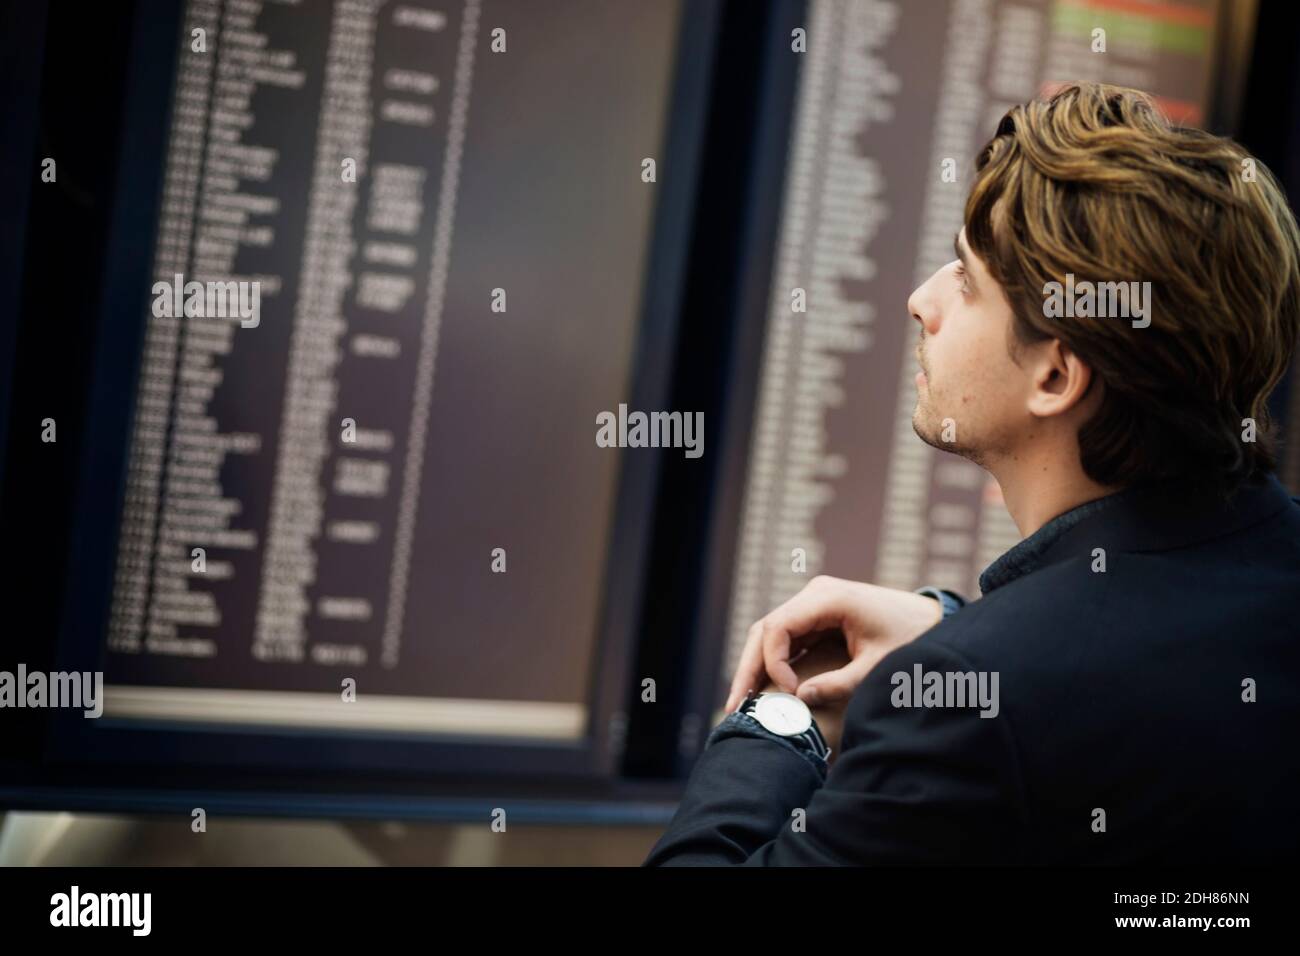 Businessman adjusting wrist watch while reading arrival departure board at airport Stock Photo